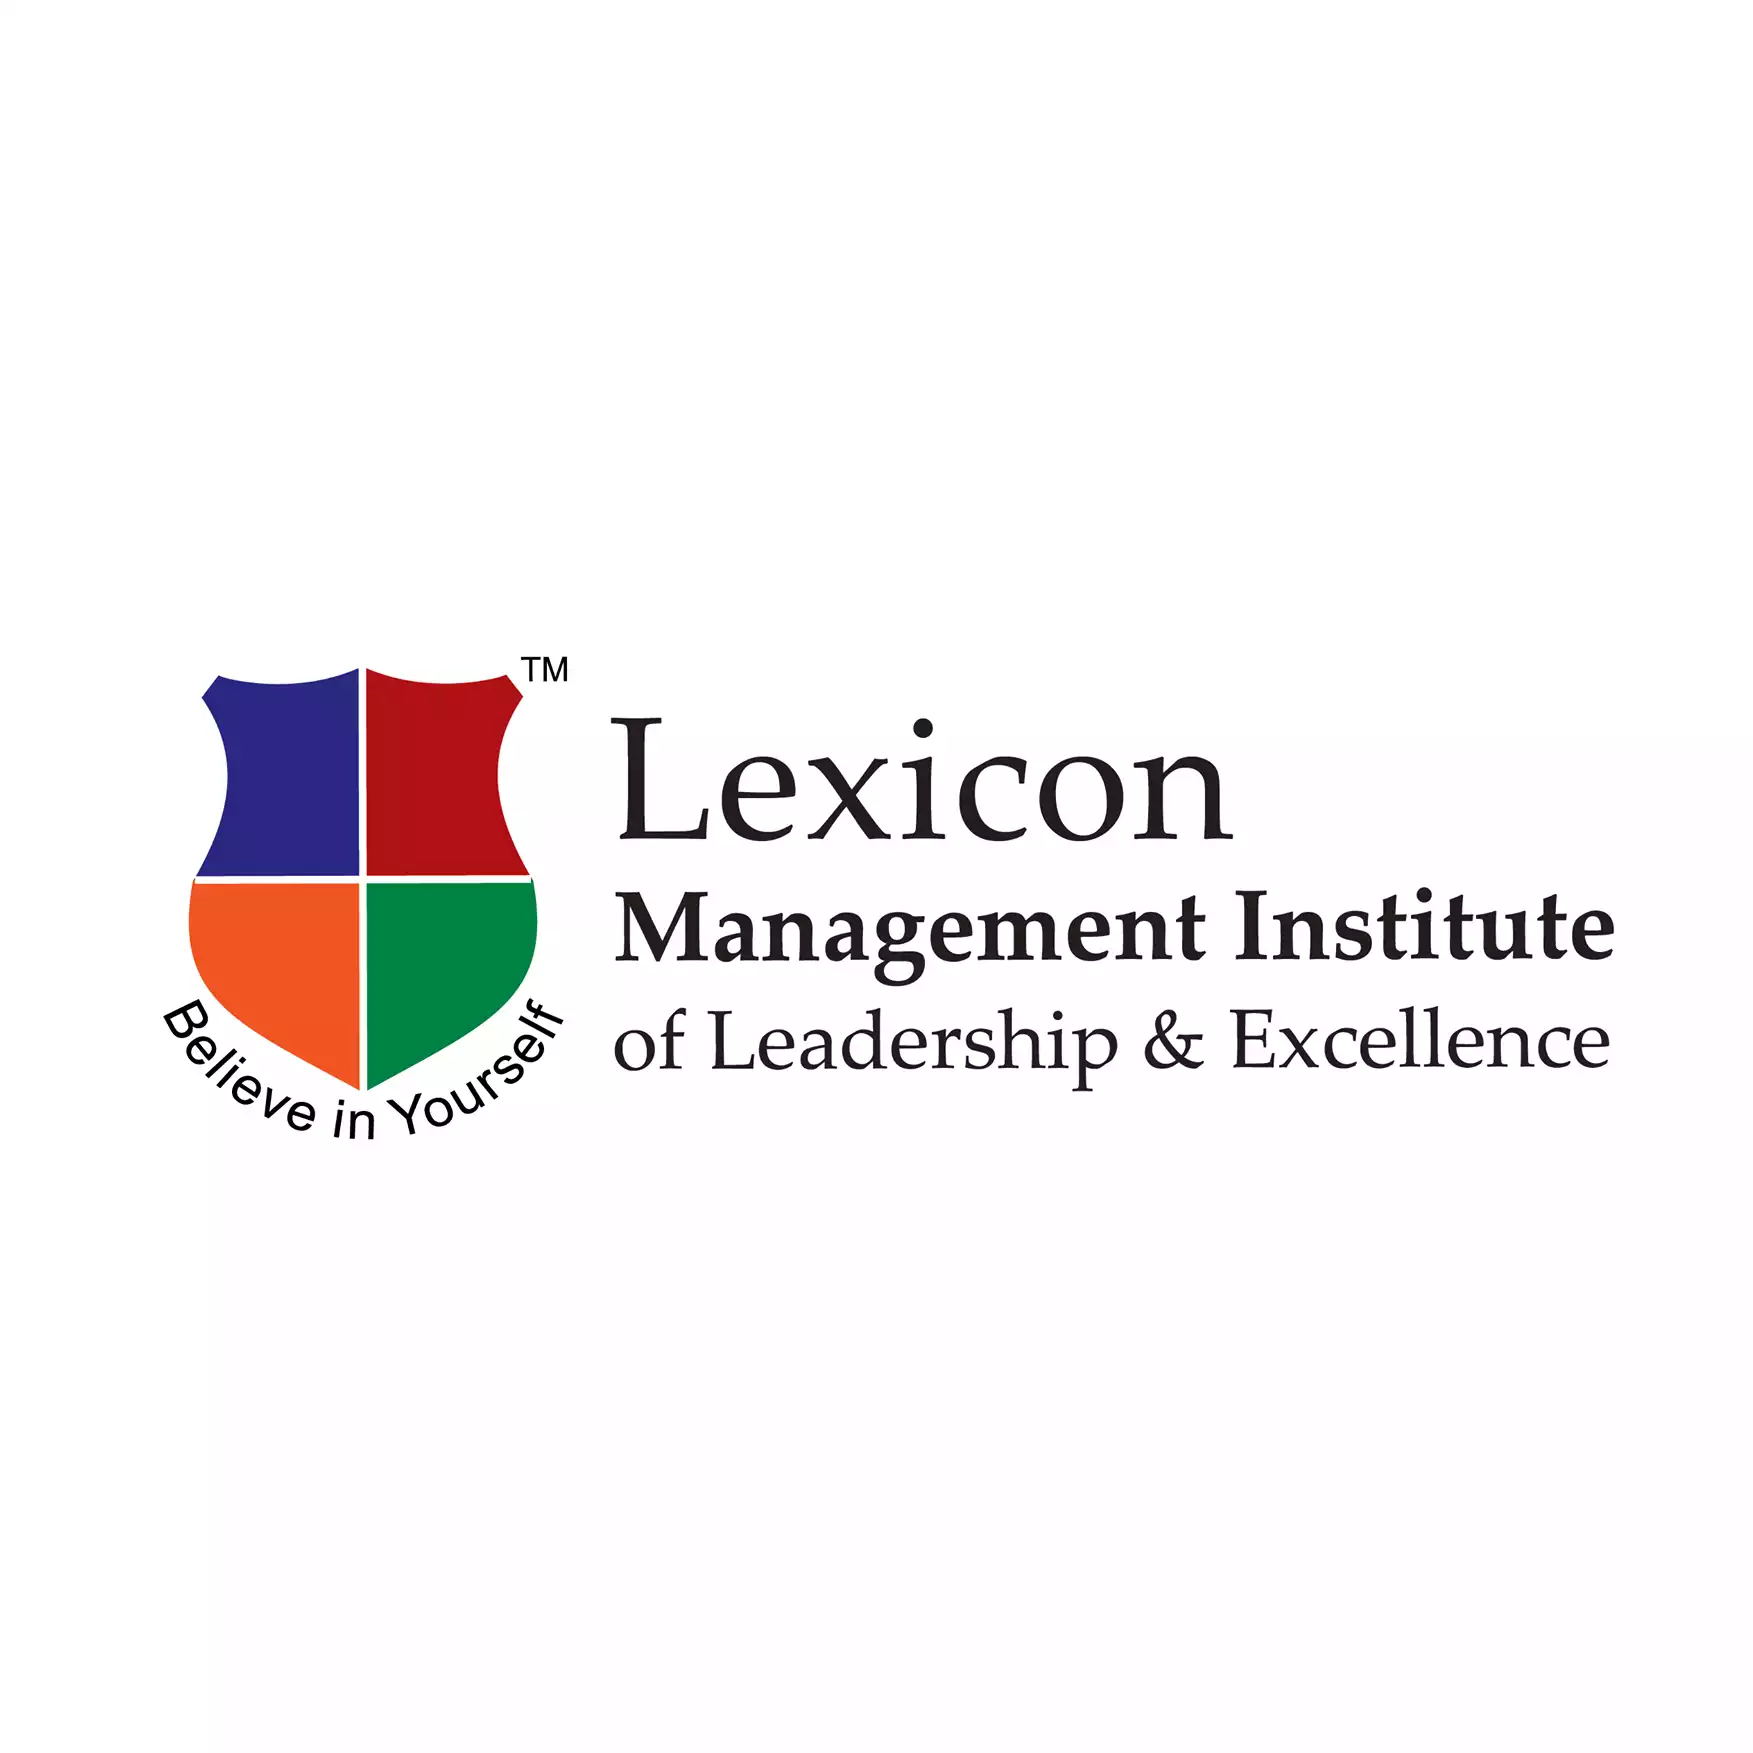  Lexicon Management Institute of Leadership and Excellence, Pune